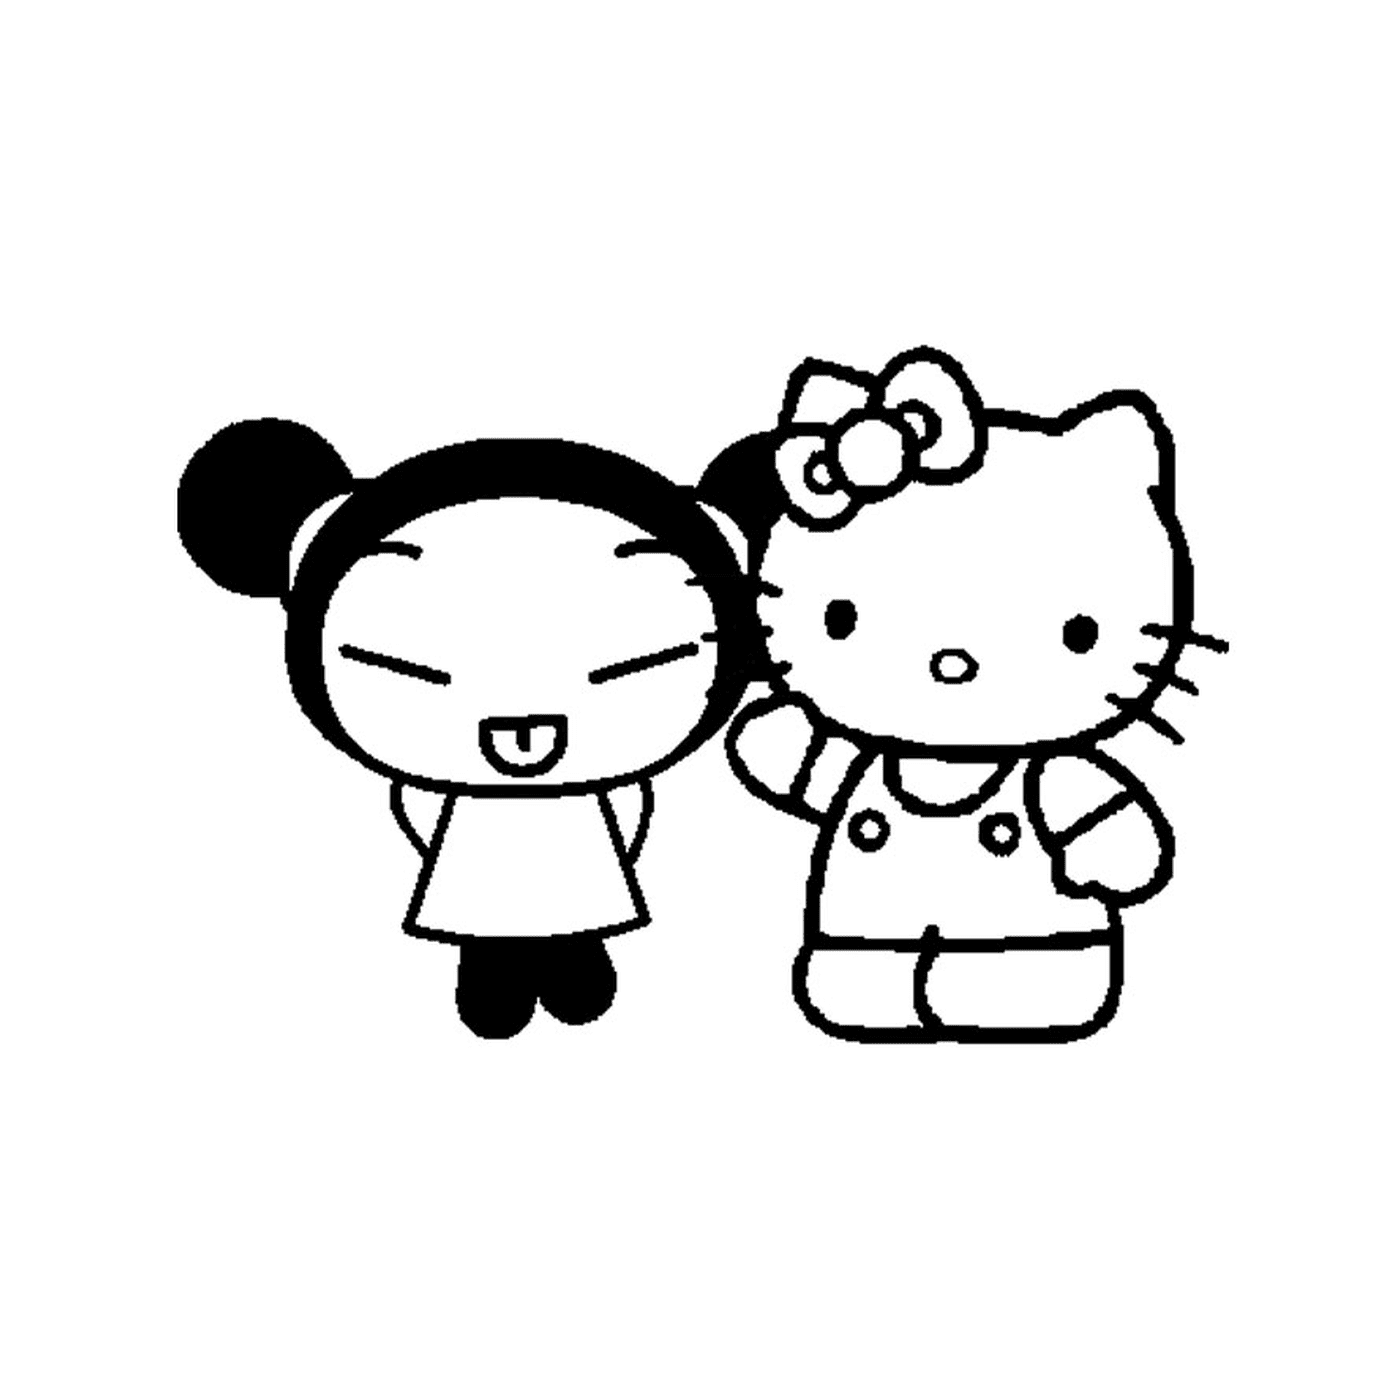  Hello Kitty and Pucca together 